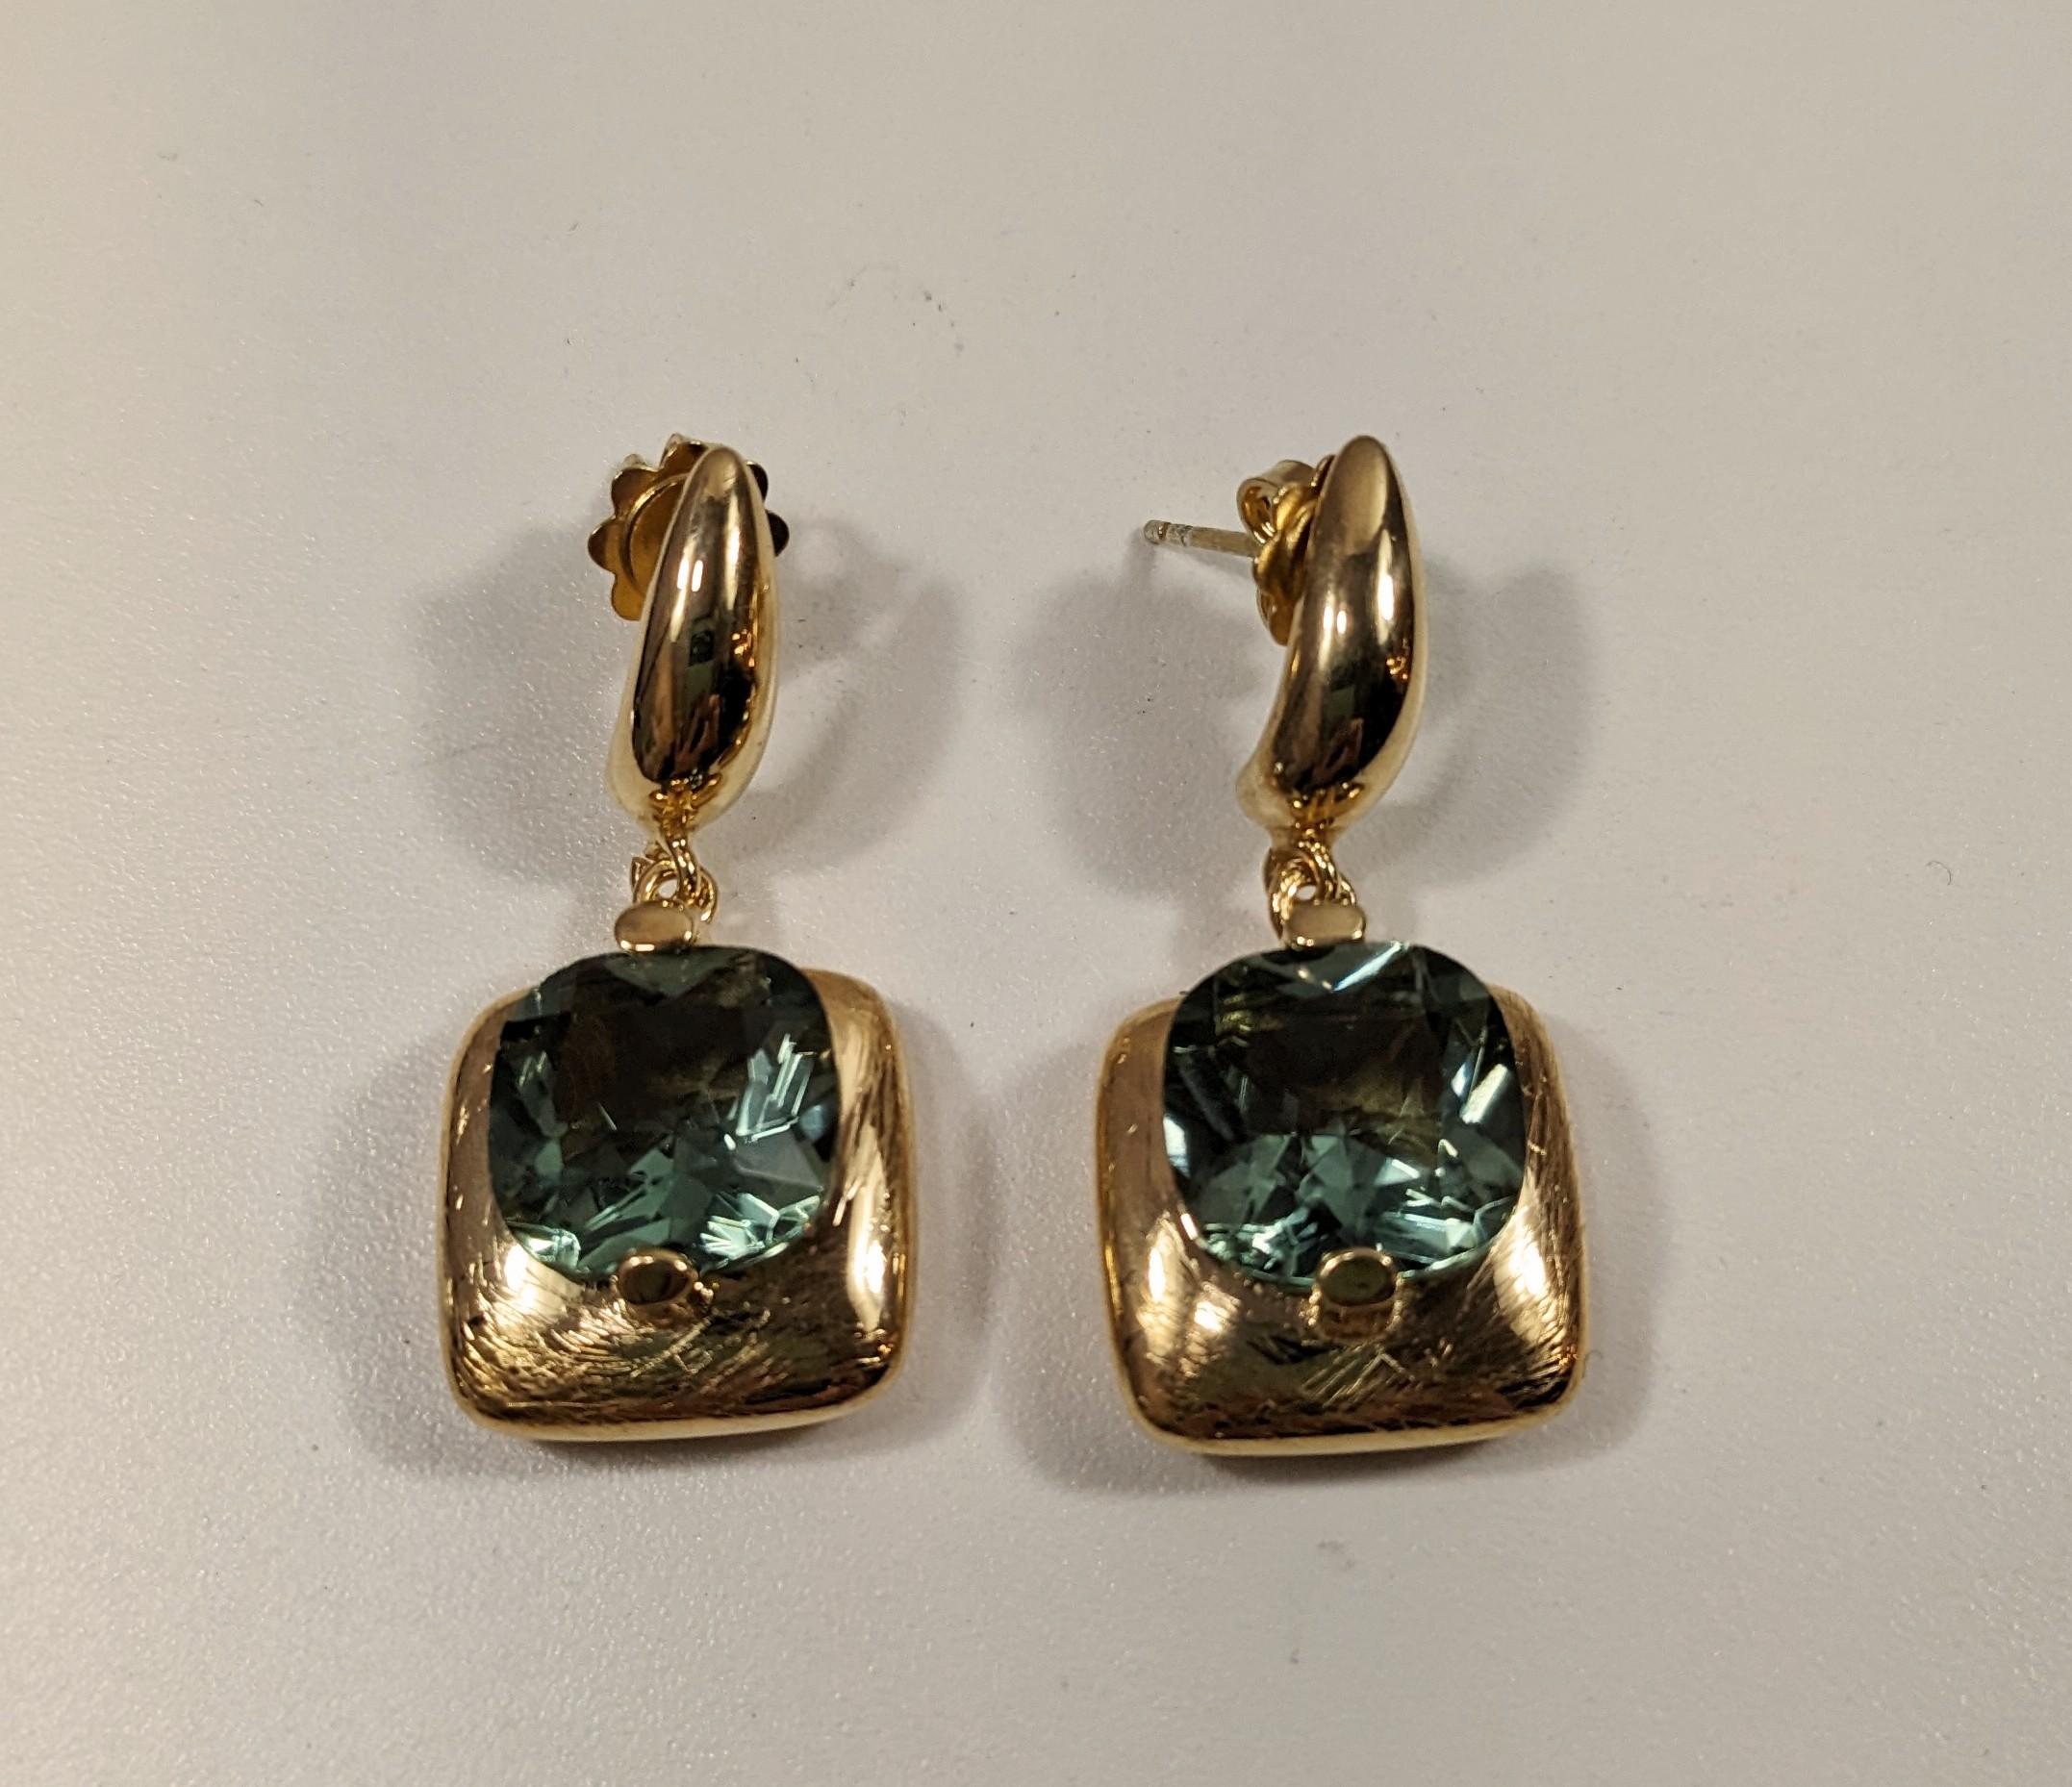  Earrings with brilliant cut quartz stone in gold plated silver viola finish For Sale 1